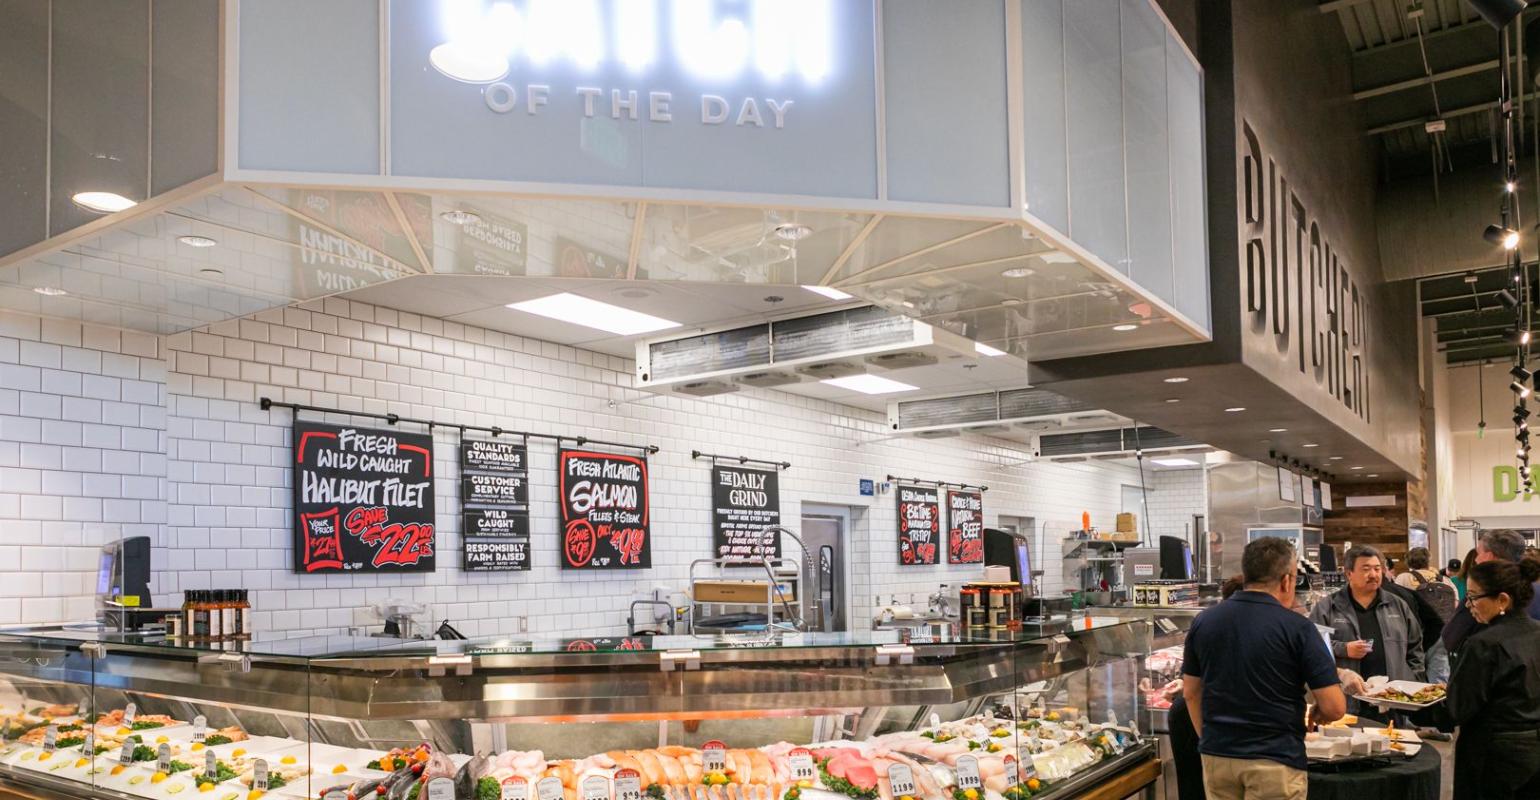 Take a look inside Bristol Farms' new food hall concept